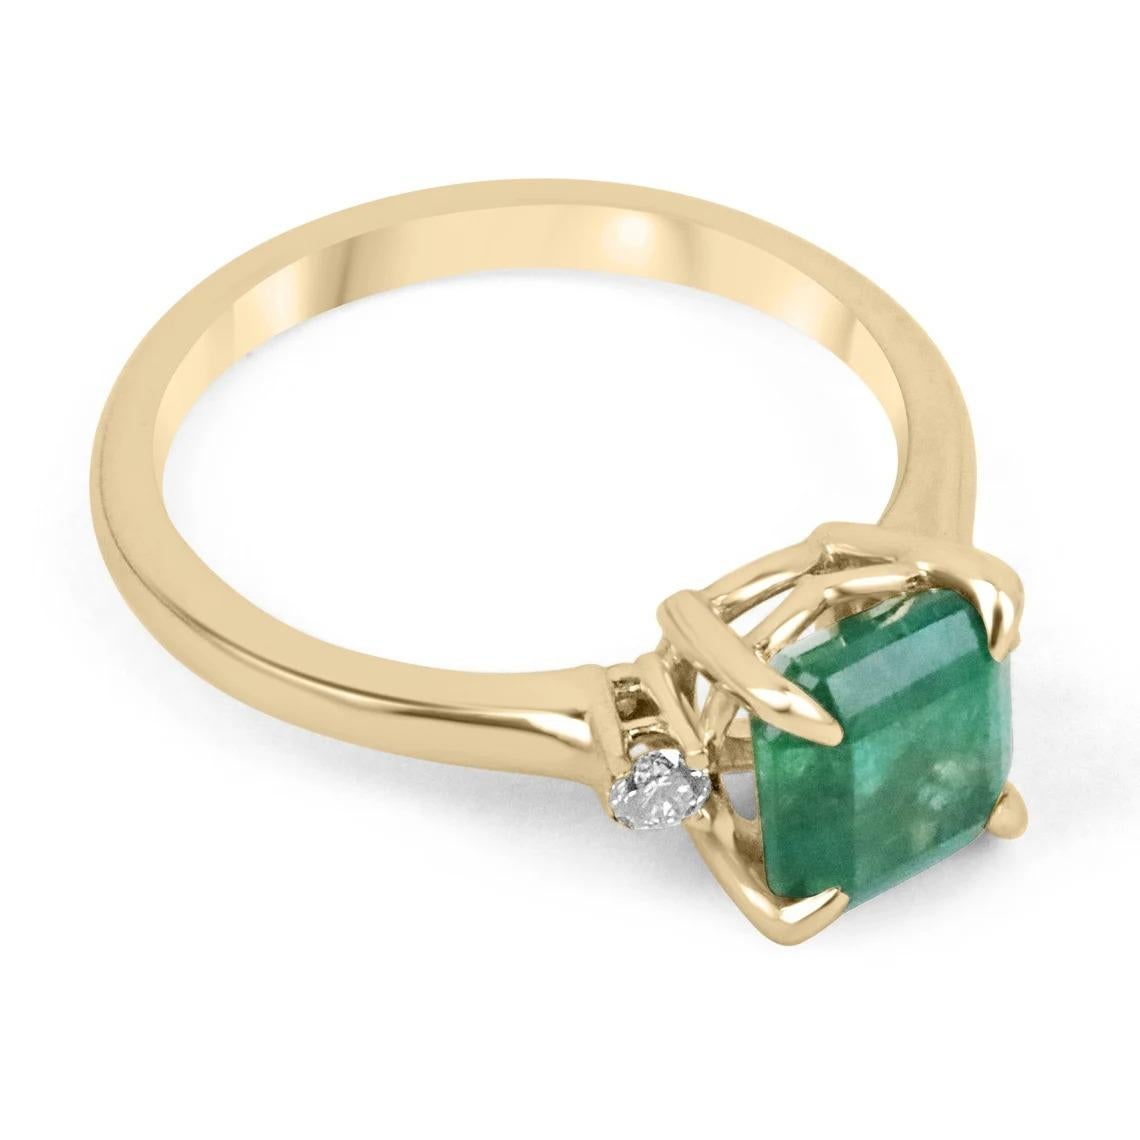 A classic emerald and diamond engagement, statement, or right-hand ring. Dexterously crafted in gleaming 14K yellow gold this ring features a 1.76-carat natural Zambian emerald-Asscher cut. Set in a secure prong setting, this extraordinary emerald